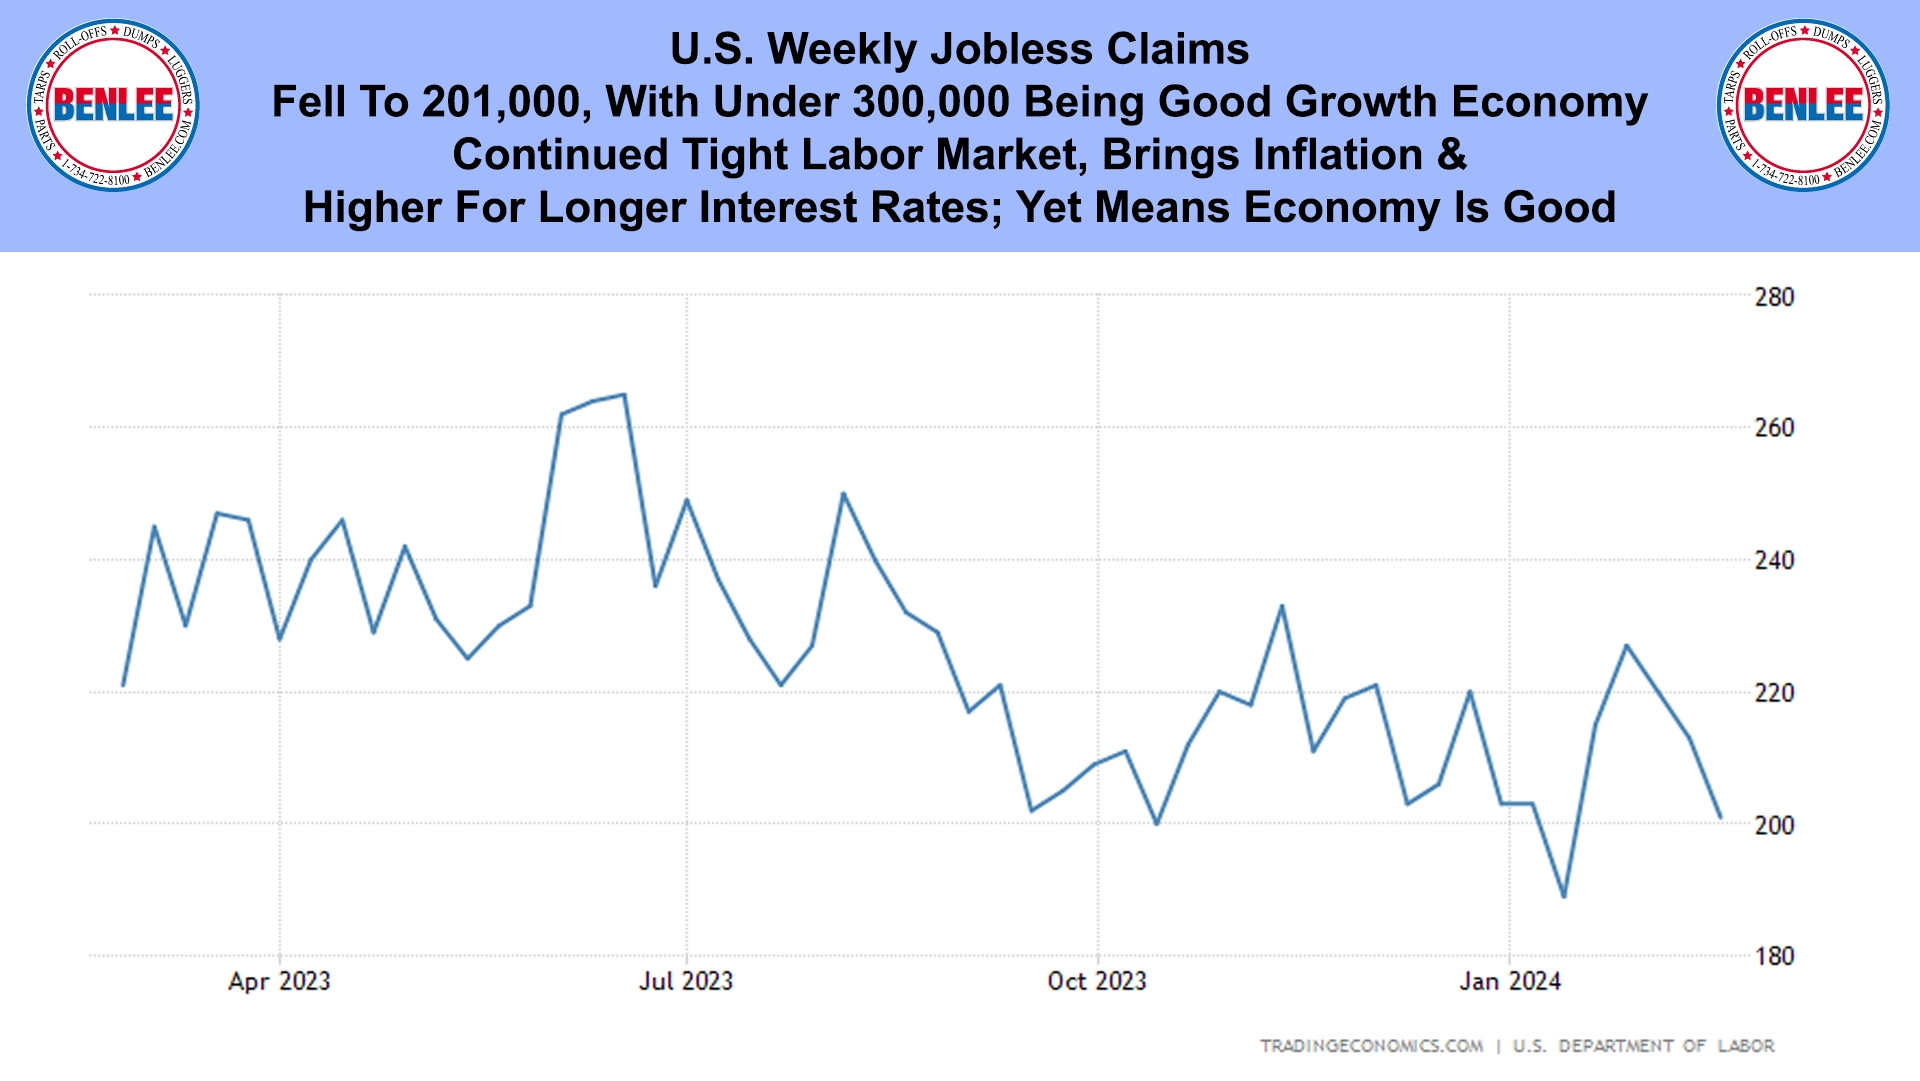 U.S. Weekly Jobless Claims